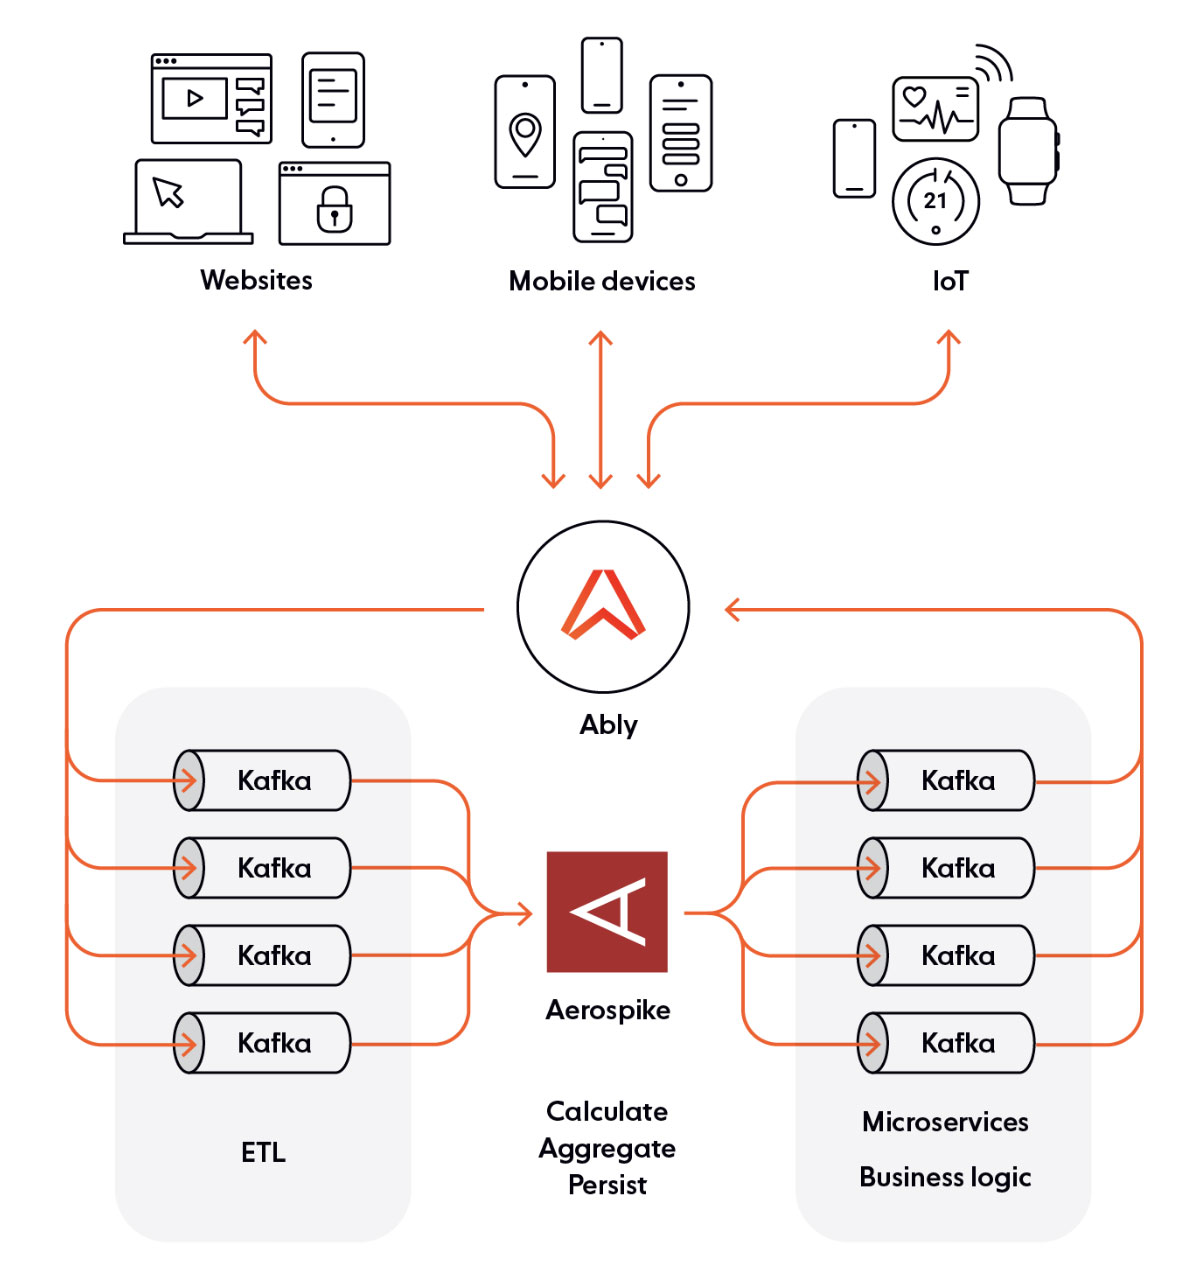 blog-diagram-Real-time-event-driven-architecture-combined-Aerospike-Ably-Kafka-solution